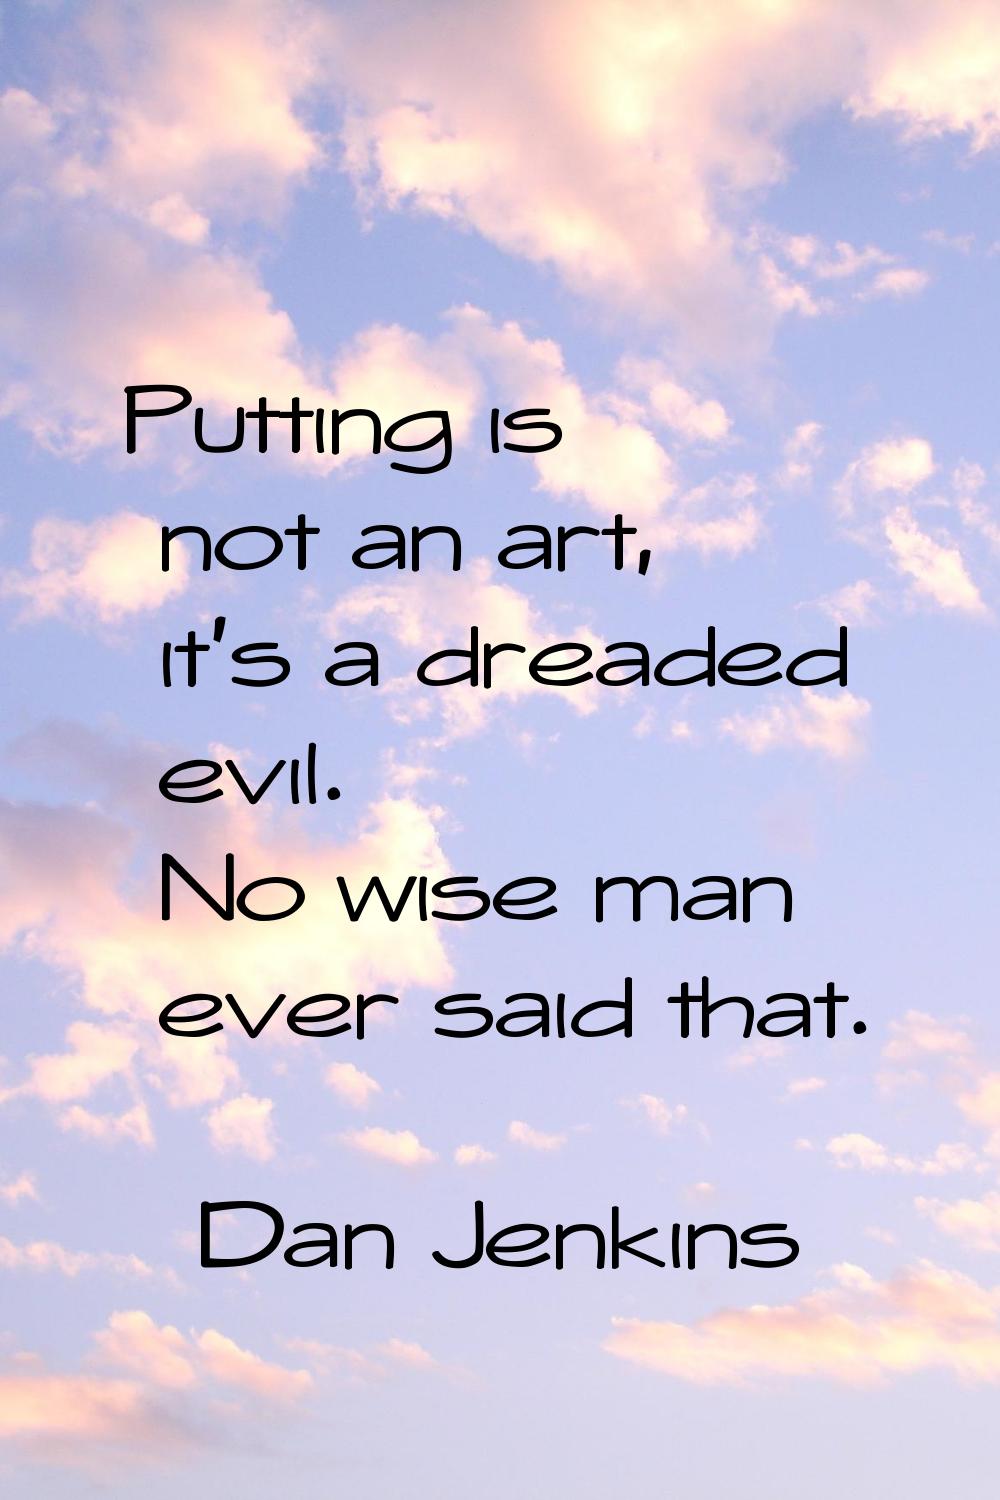 Putting is not an art, it's a dreaded evil. No wise man ever said that.